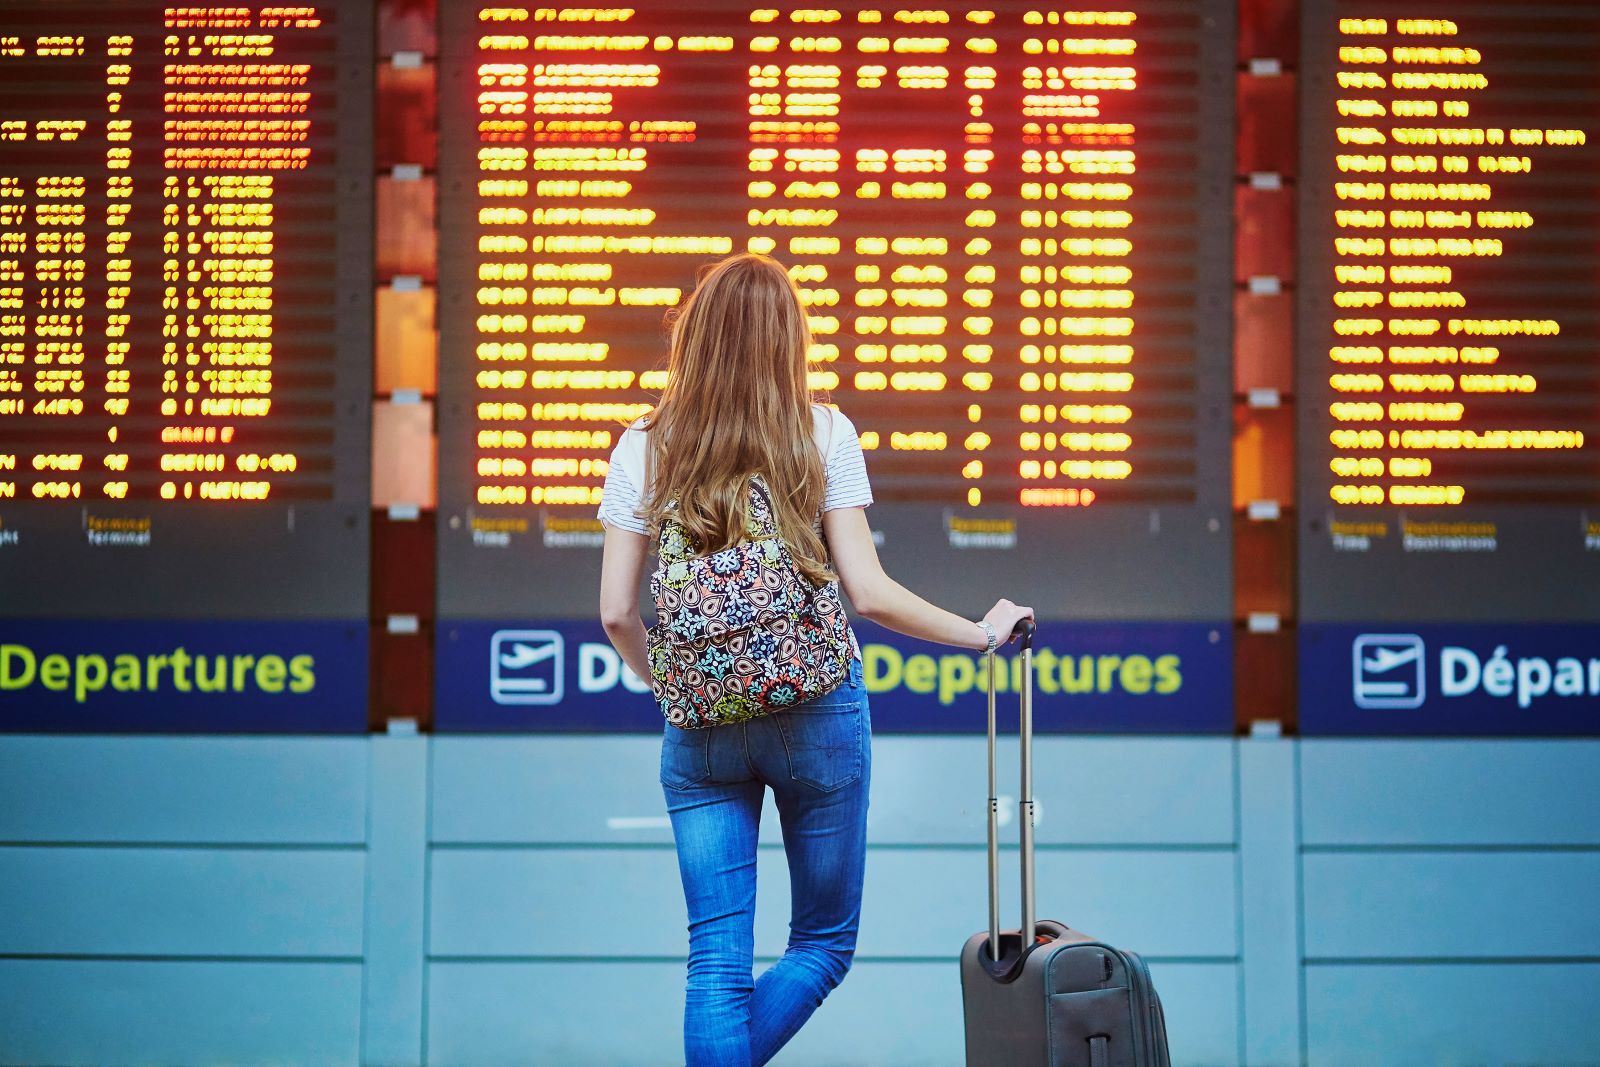 <p class="wp-caption-text">Image Credit: Shutterstock / Ekaterina Pokrovsky</p>  <p>Choosing direct flights can reduce travel time and decrease the risk of missed connections or delays, which can be more than just inconveniences for those with health concerns.</p>